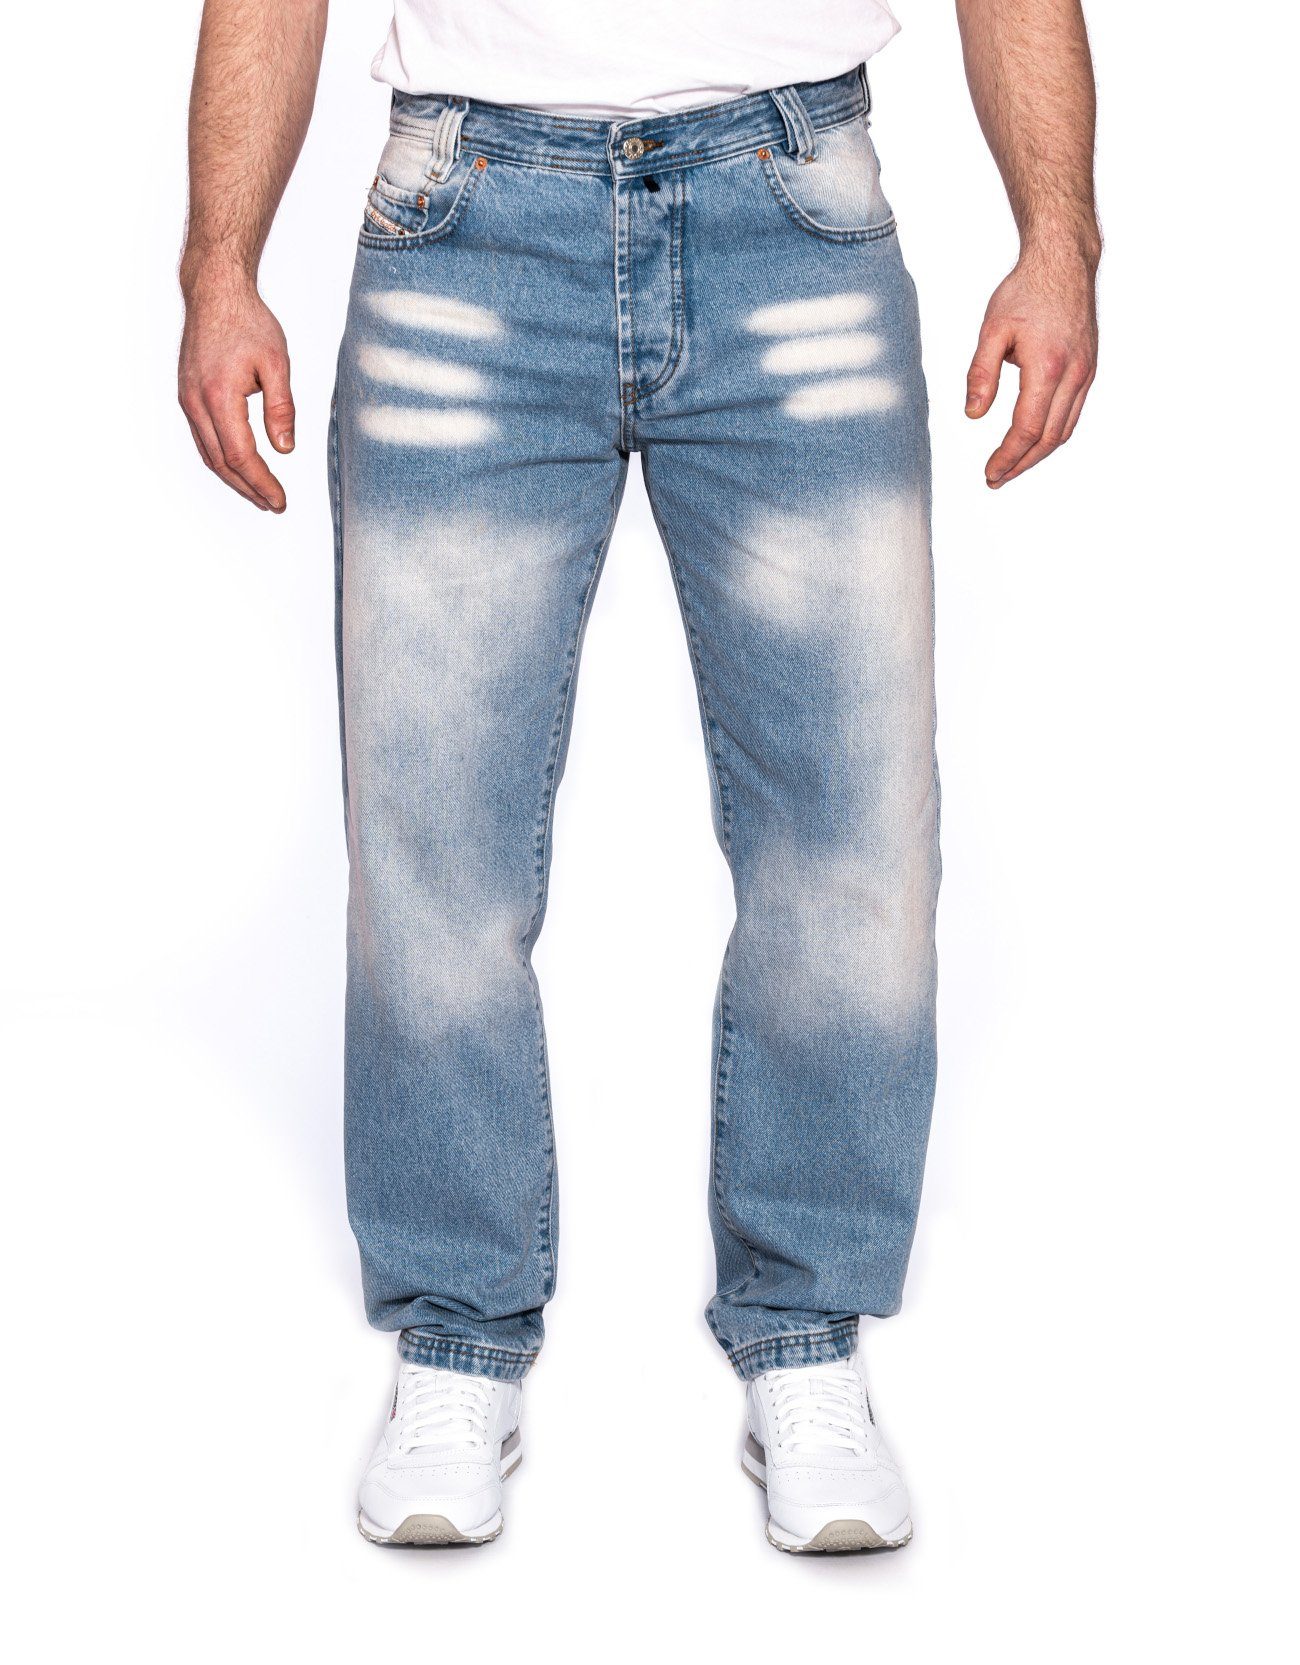 PICALDI Jeans Weite Jeans Zicco 472 Loose Fit, Relaxed Fit Chemie 1